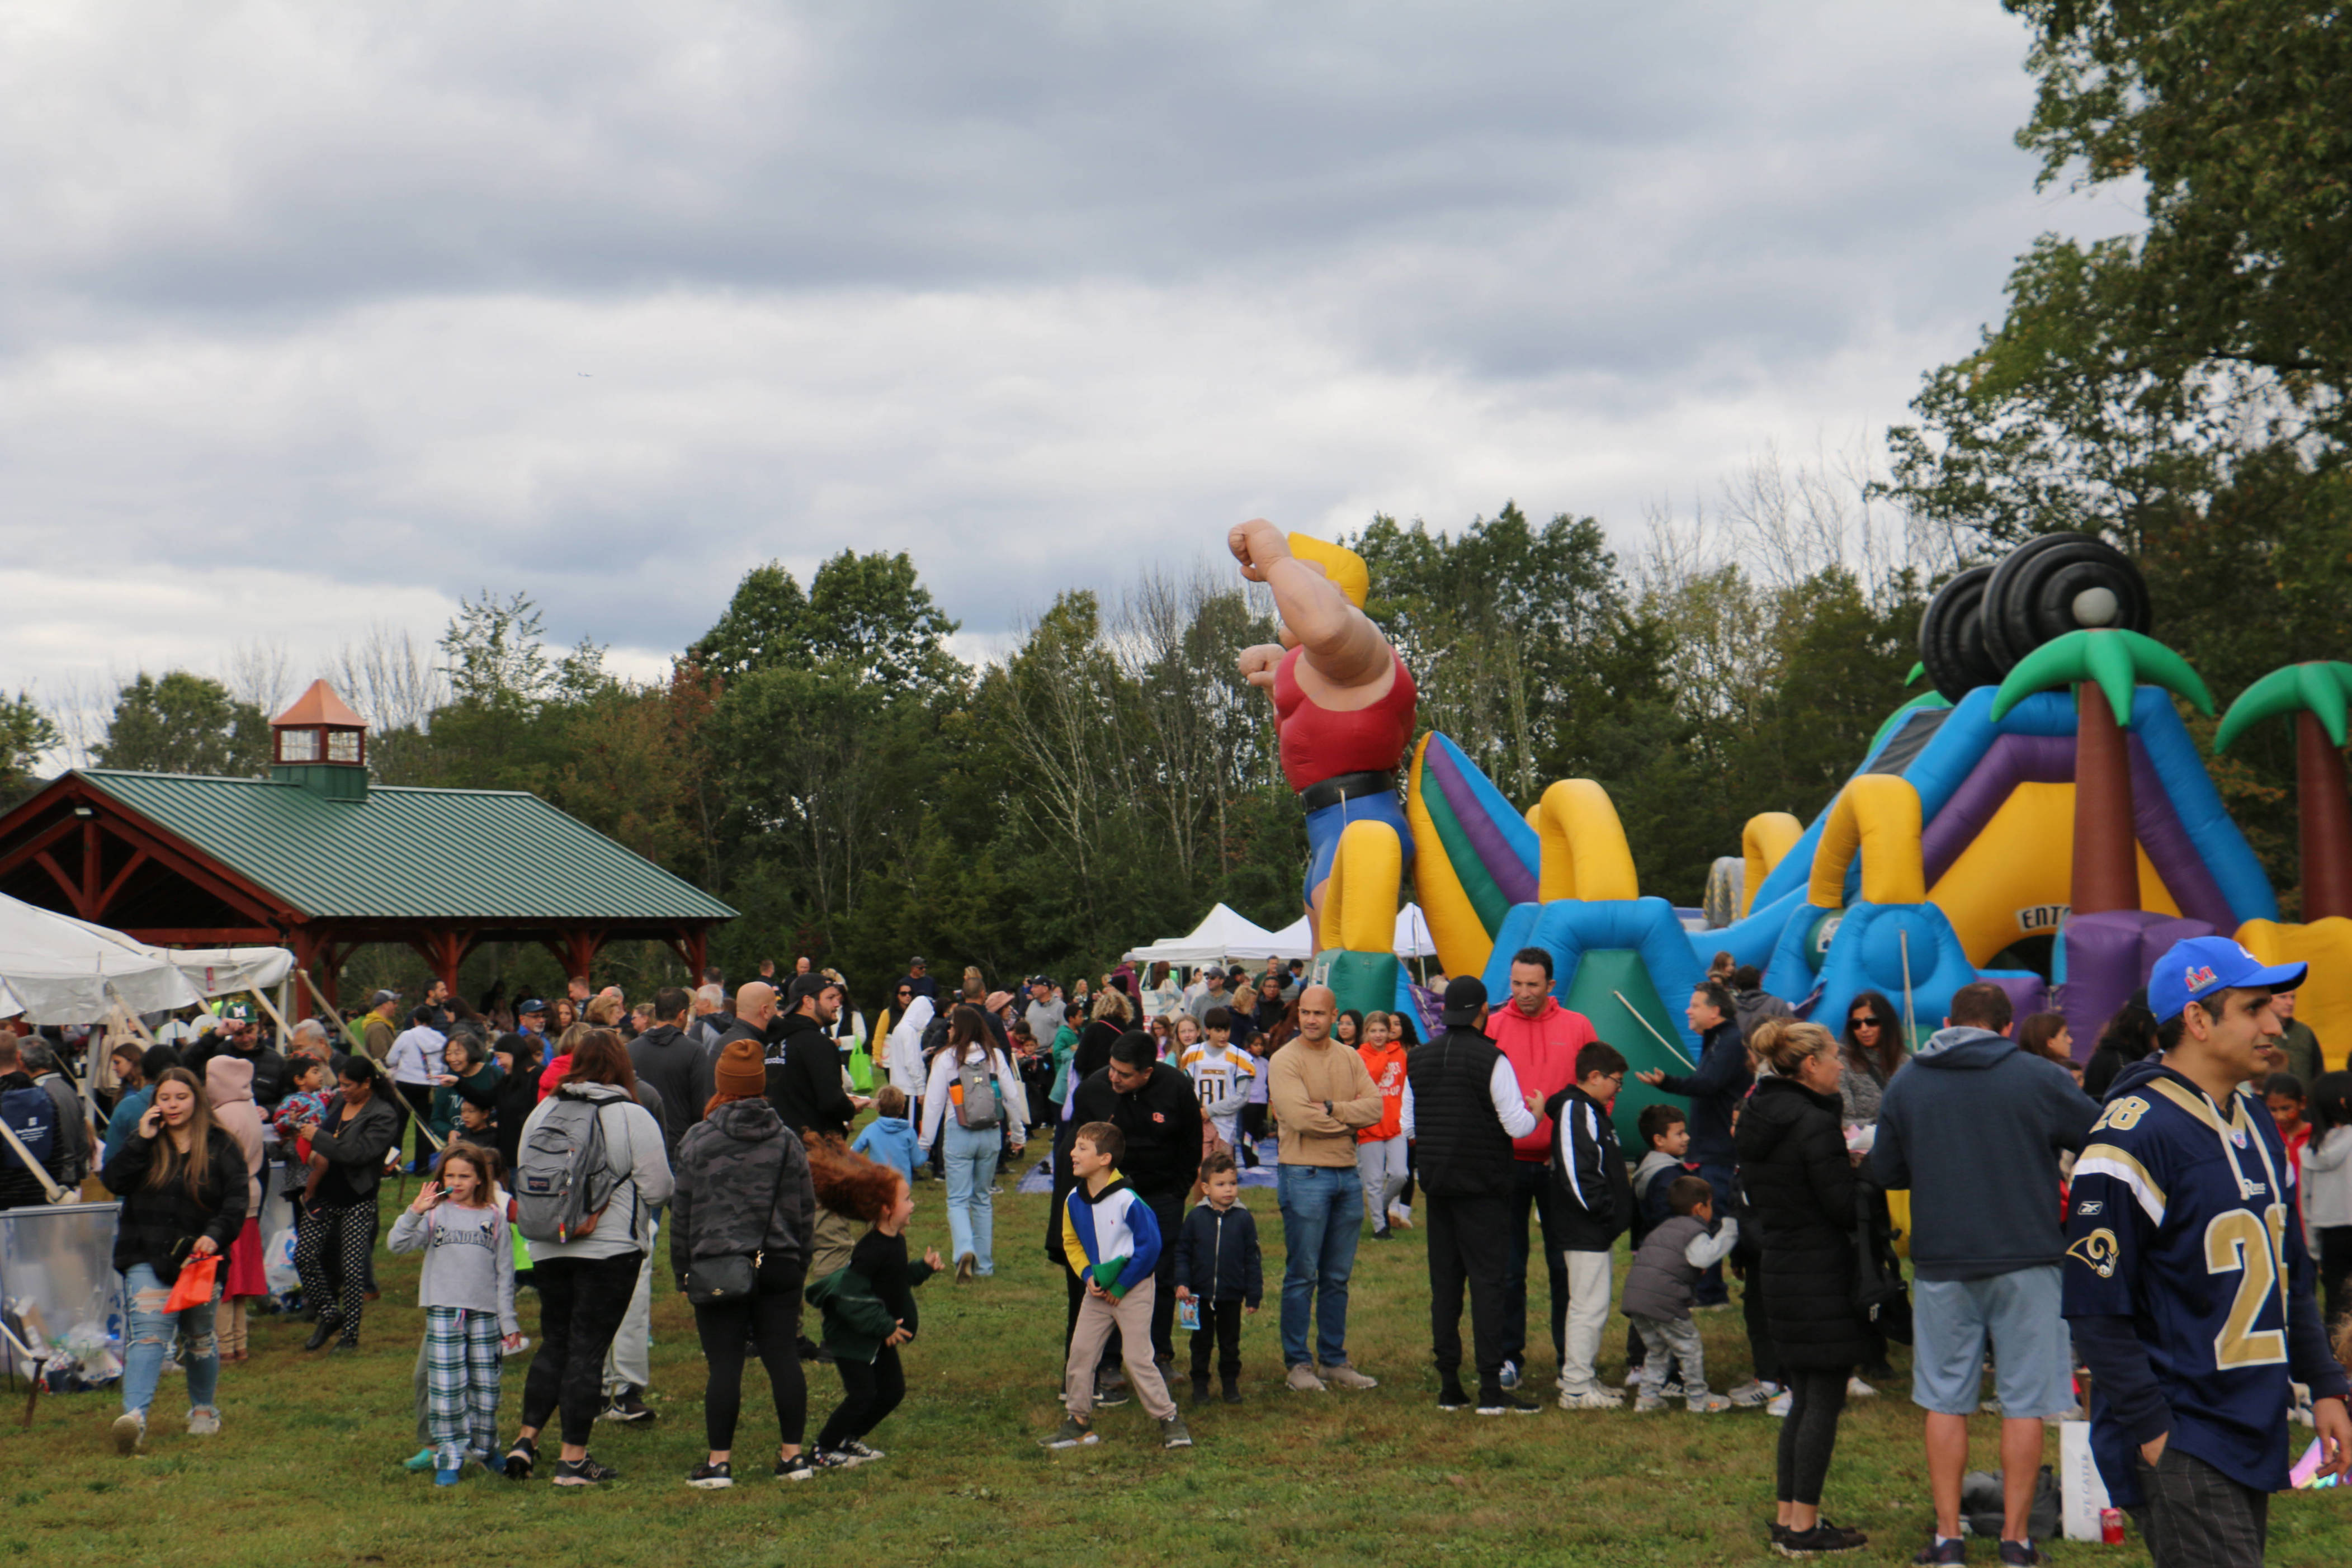 Montville Residents Come Out in Droves to Celebrate Montville Day